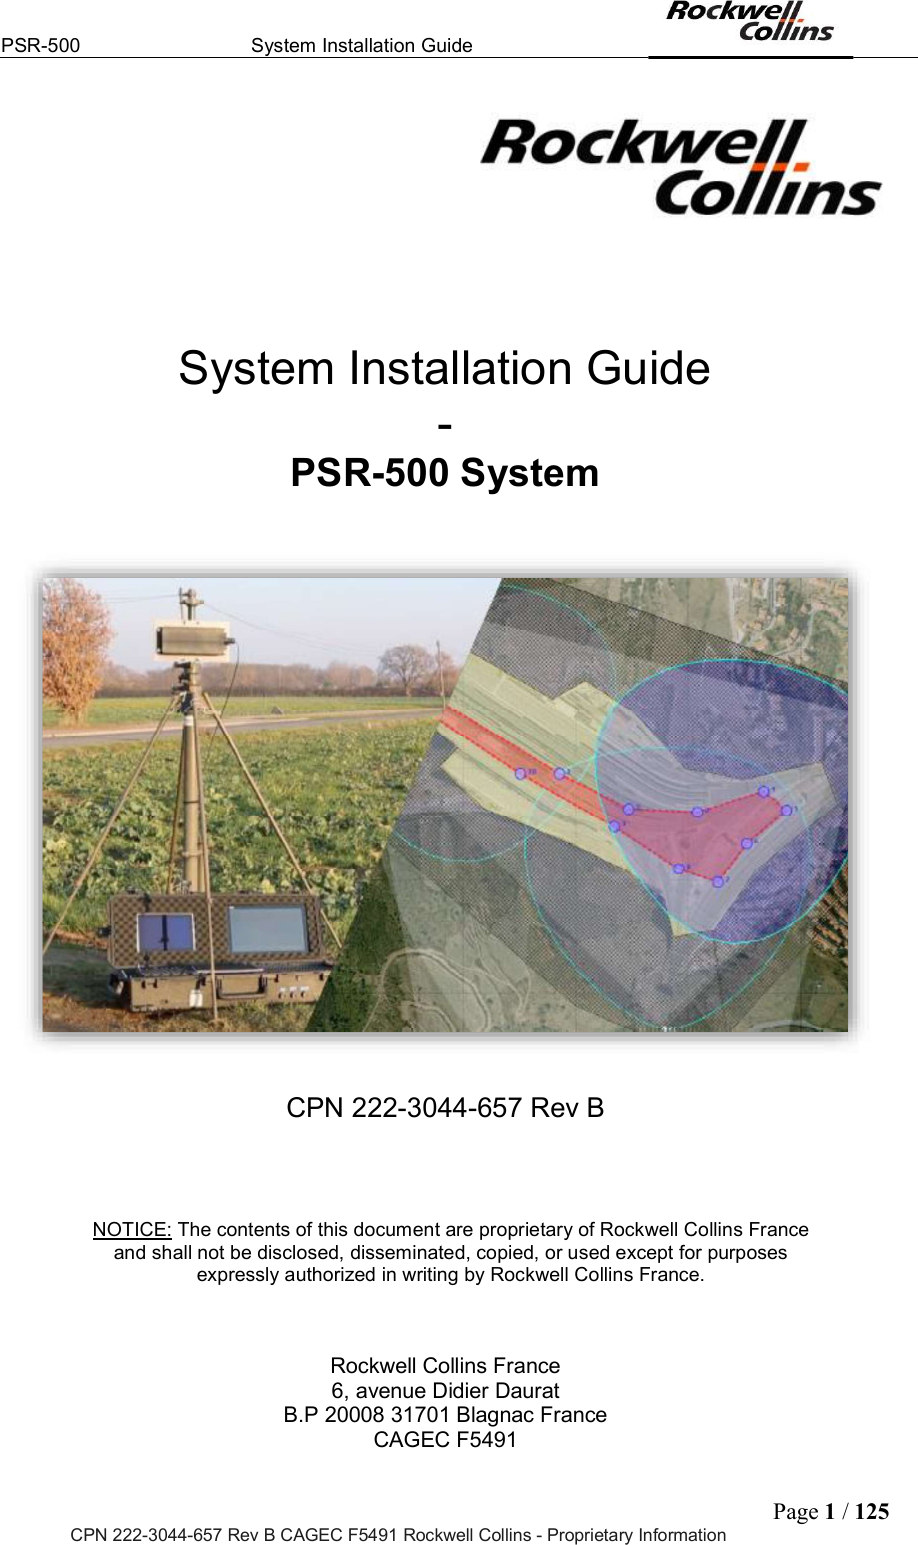 PSR-500  System Installation Guide  Page 1 / 125 CPN 222-3044-657 Rev B CAGEC F5491 Rockwell Collins - Proprietary Information    System Installation Guide - PSR-500 System    CPN 222-3044-657 Rev B    NOTICE: The contents of this document are proprietary of Rockwell Collins France and shall not be disclosed, disseminated, copied, or used except for purposes expressly authorized in writing by Rockwell Collins France.    Rockwell Collins France 6, avenue Didier Daurat B.P 20008 31701 Blagnac France CAGEC F5491 